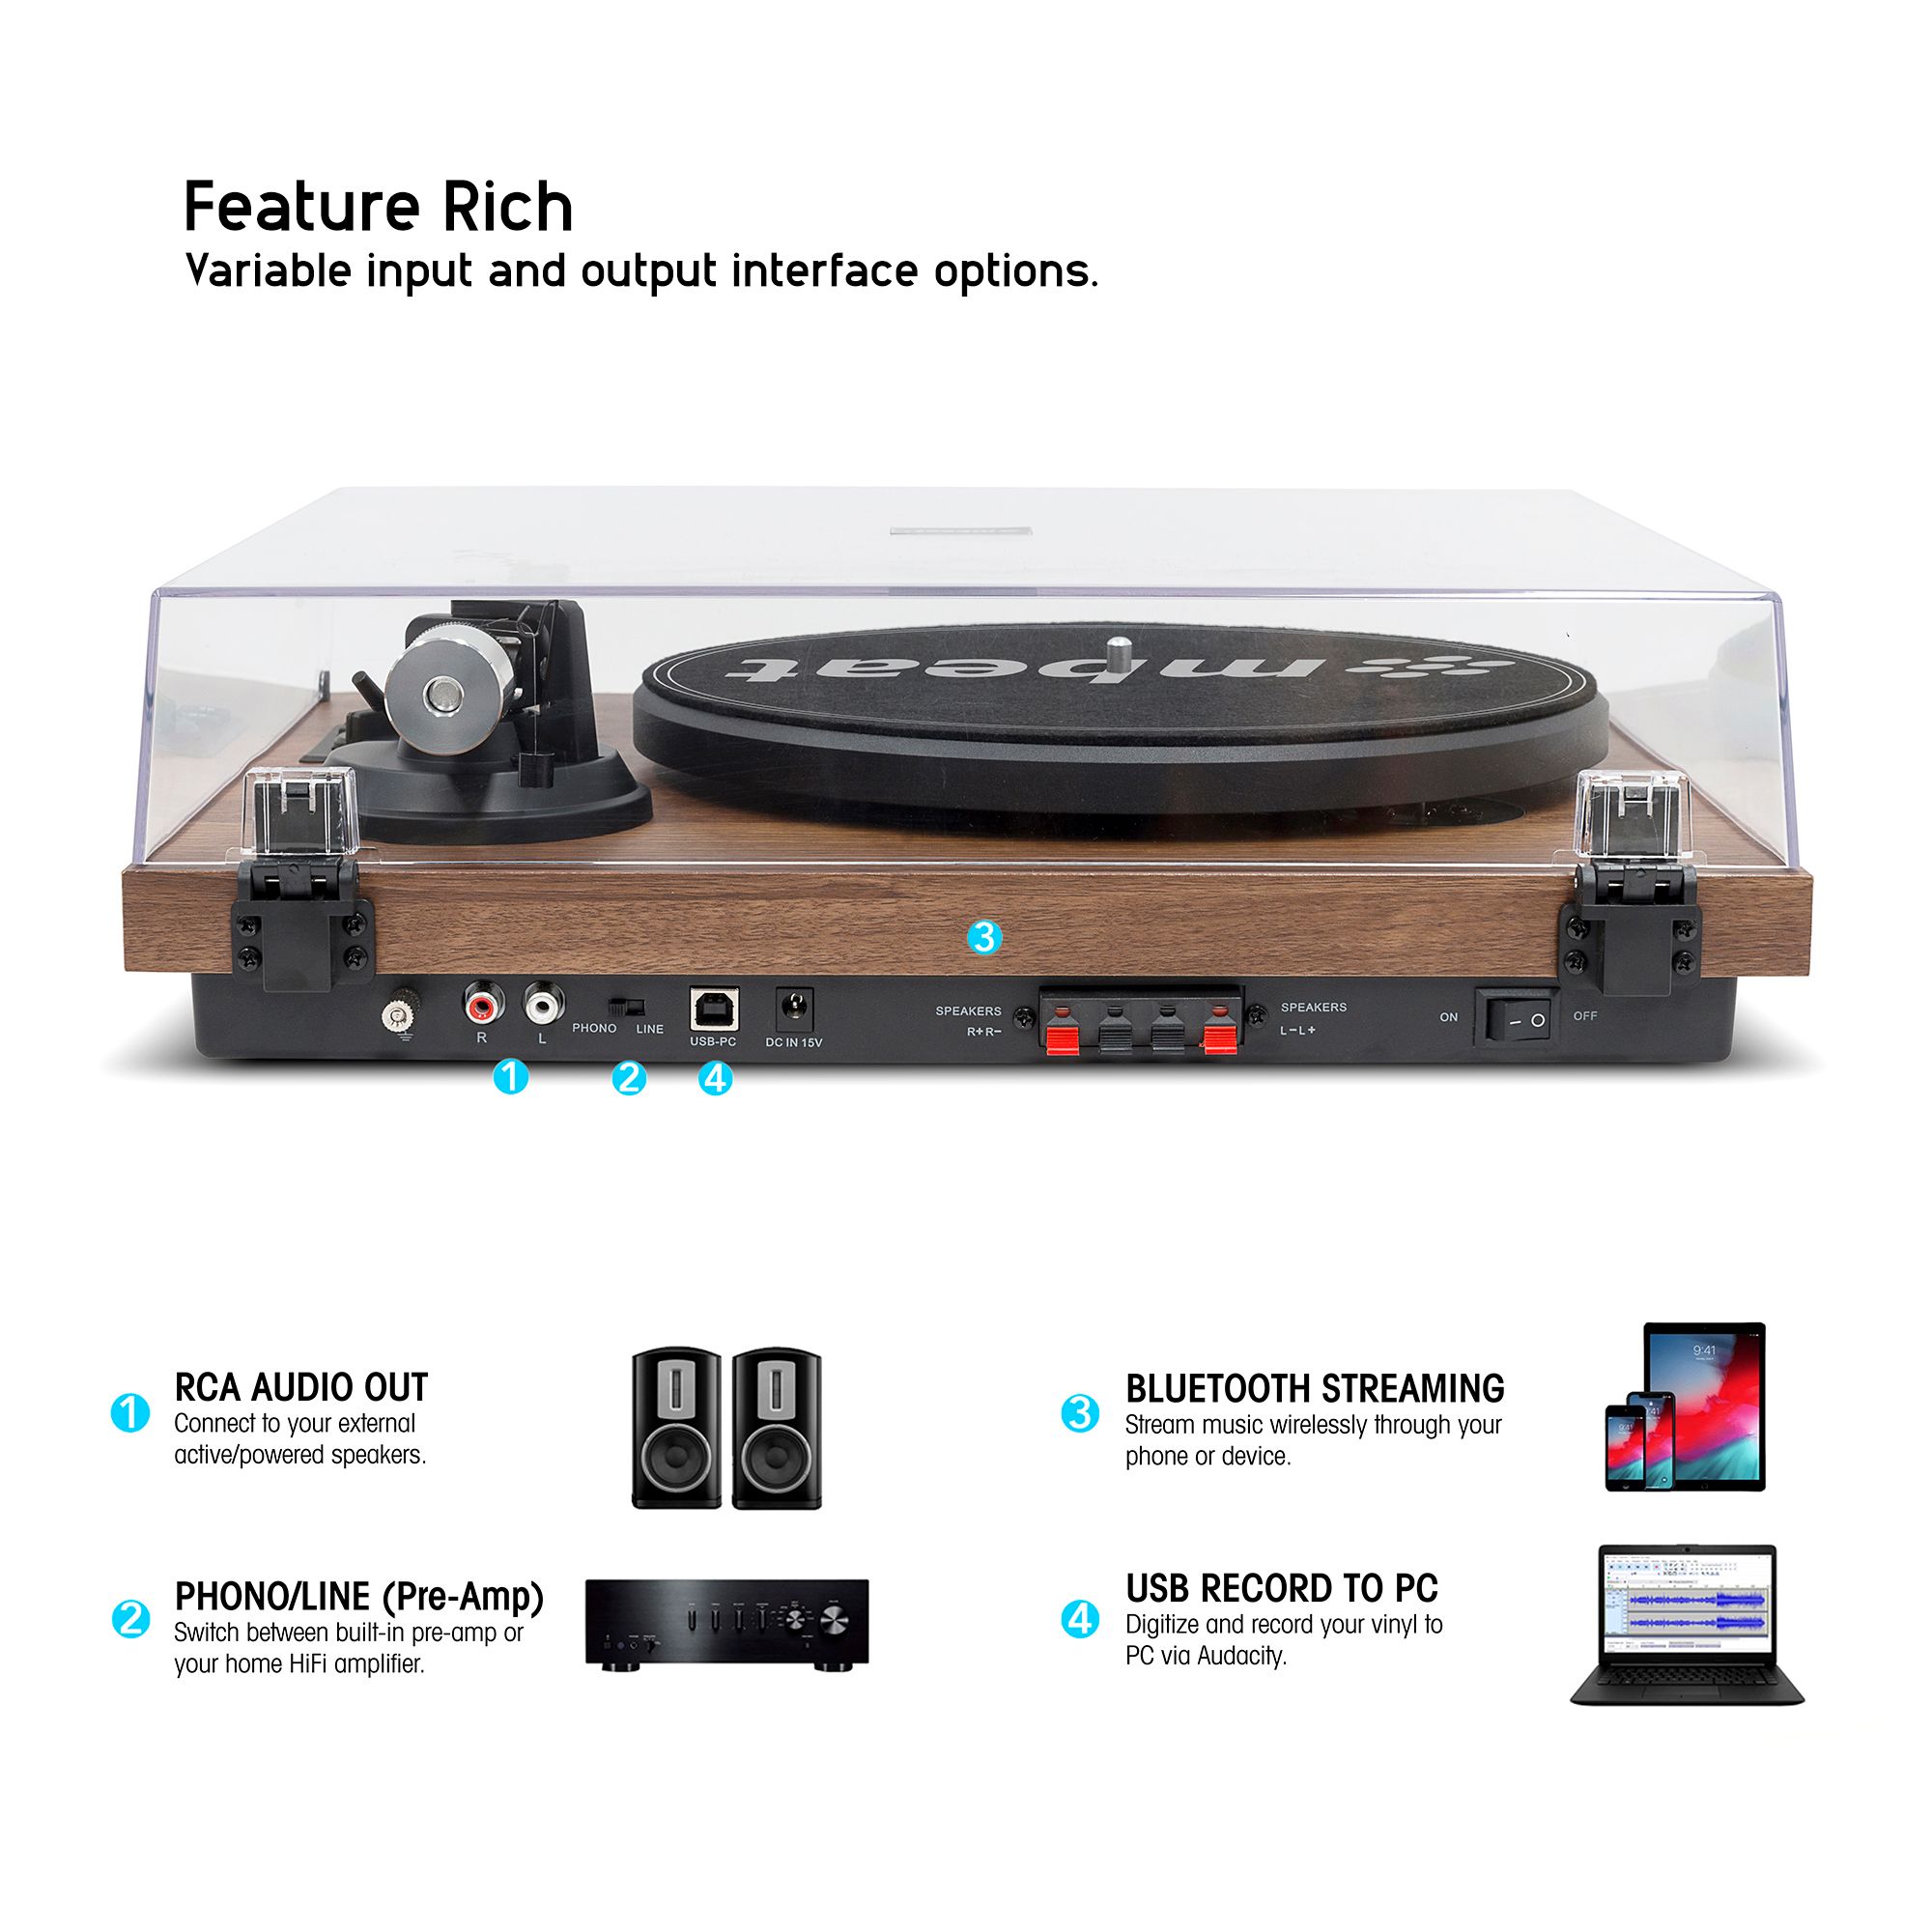 mbeat®HIFI Turntable with Speakers – Vinyl Turntable Record Player with 36W Bookshelf Speakers, 33/45 RPM, Bluetooth Streaming via Smart Devices